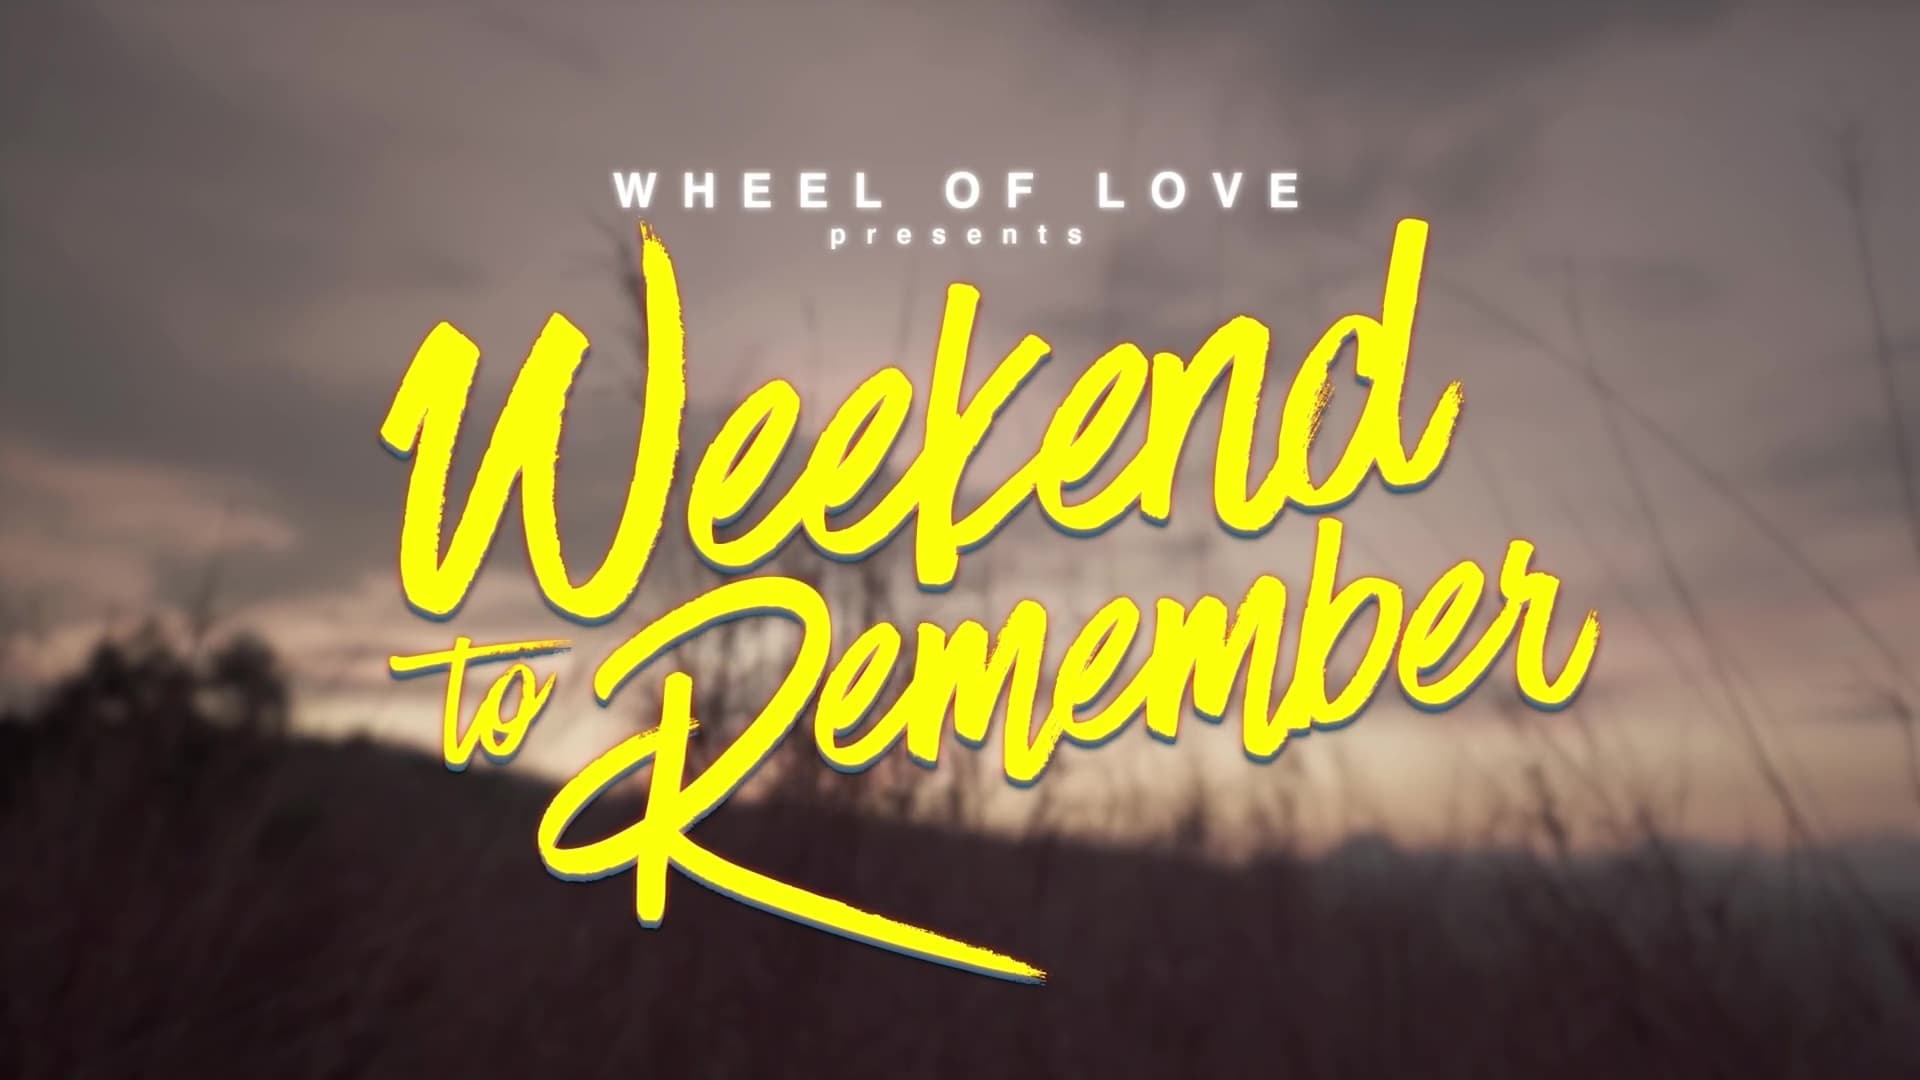 Wheel of Love: Weekend to Remember